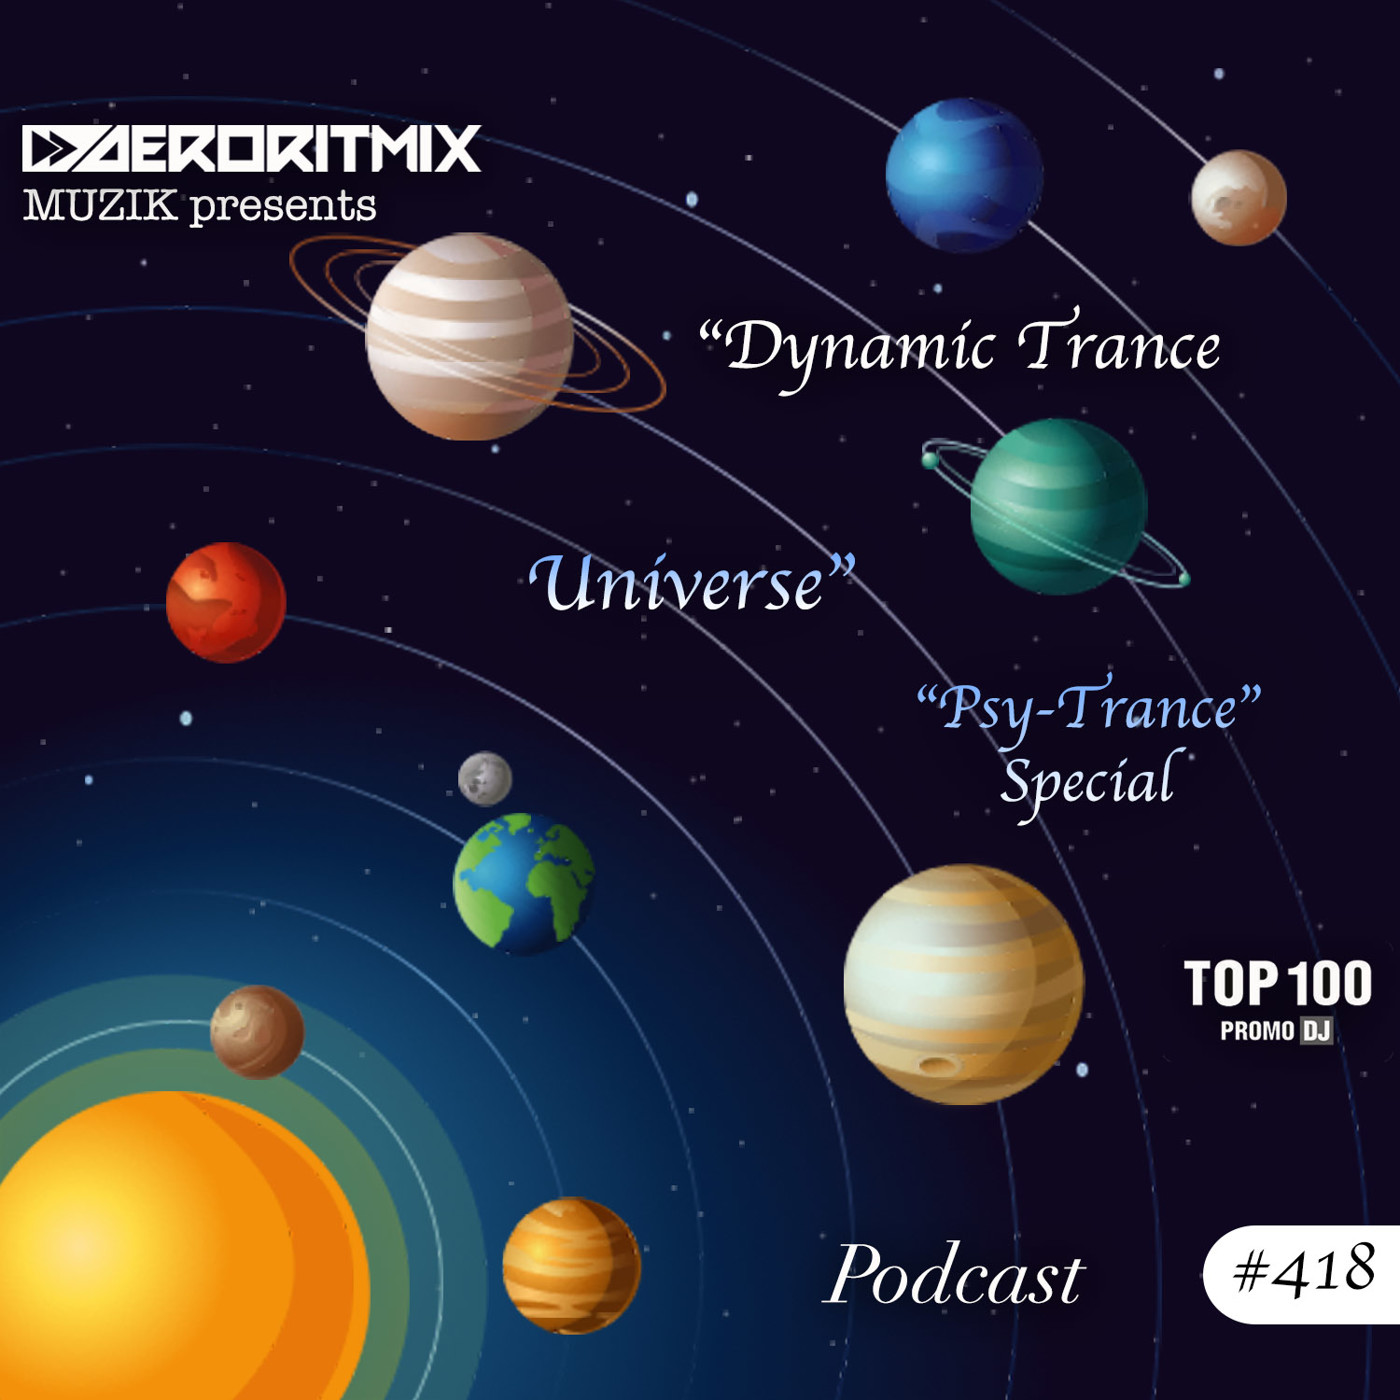 AER]O[RITMIX pres. #DTUPodcast (Psy-Trance) Special #418